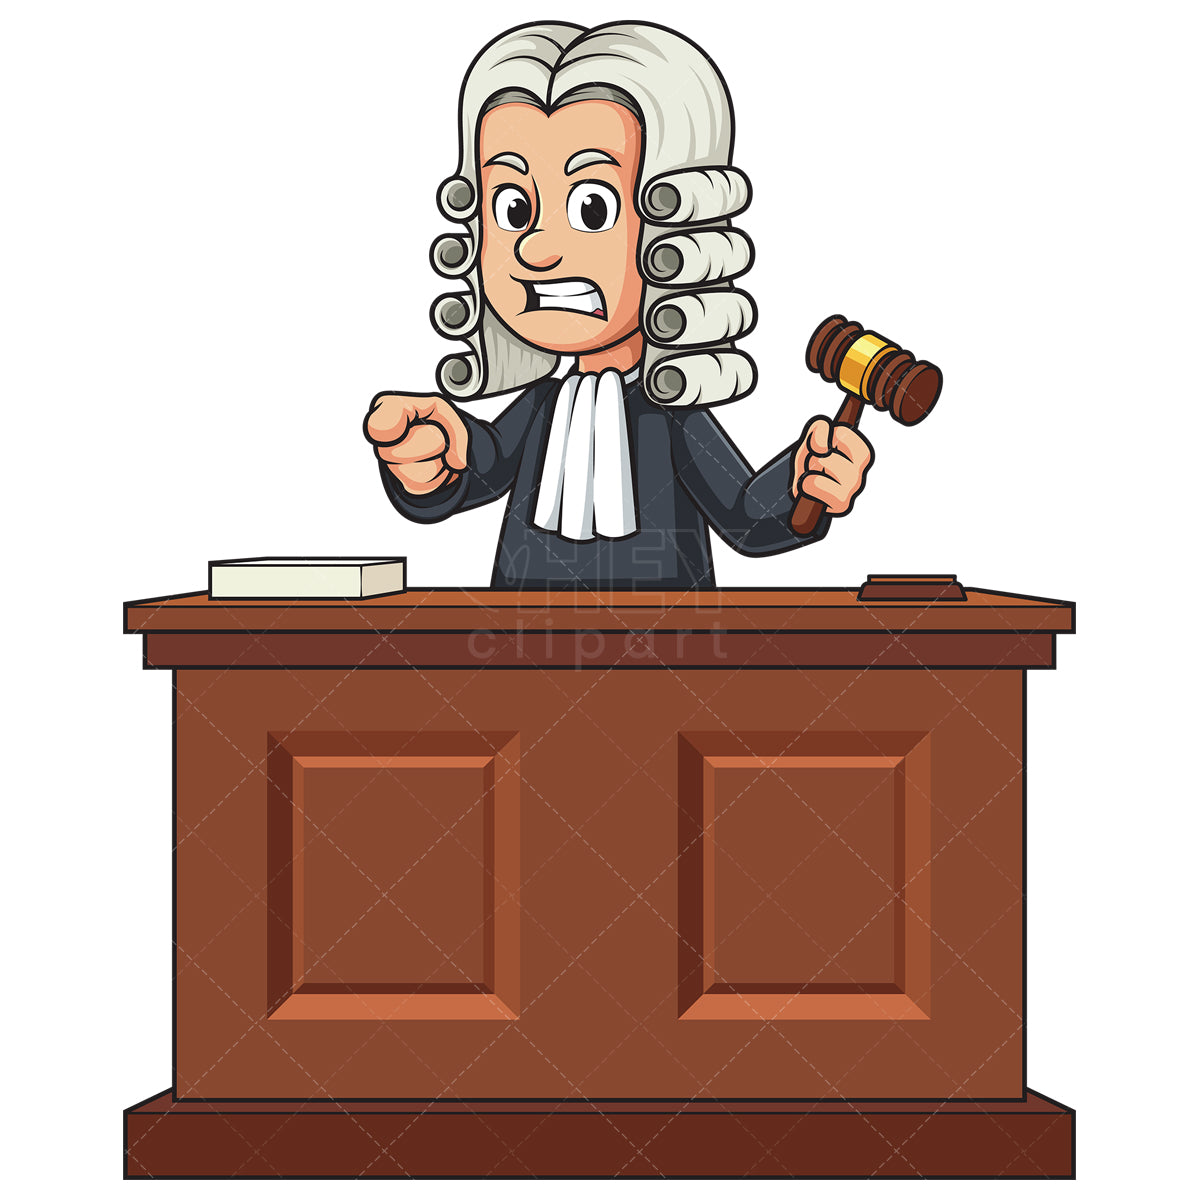 Royalty-free stock vector illustration of a male judge pointing angrily while holding gavel.